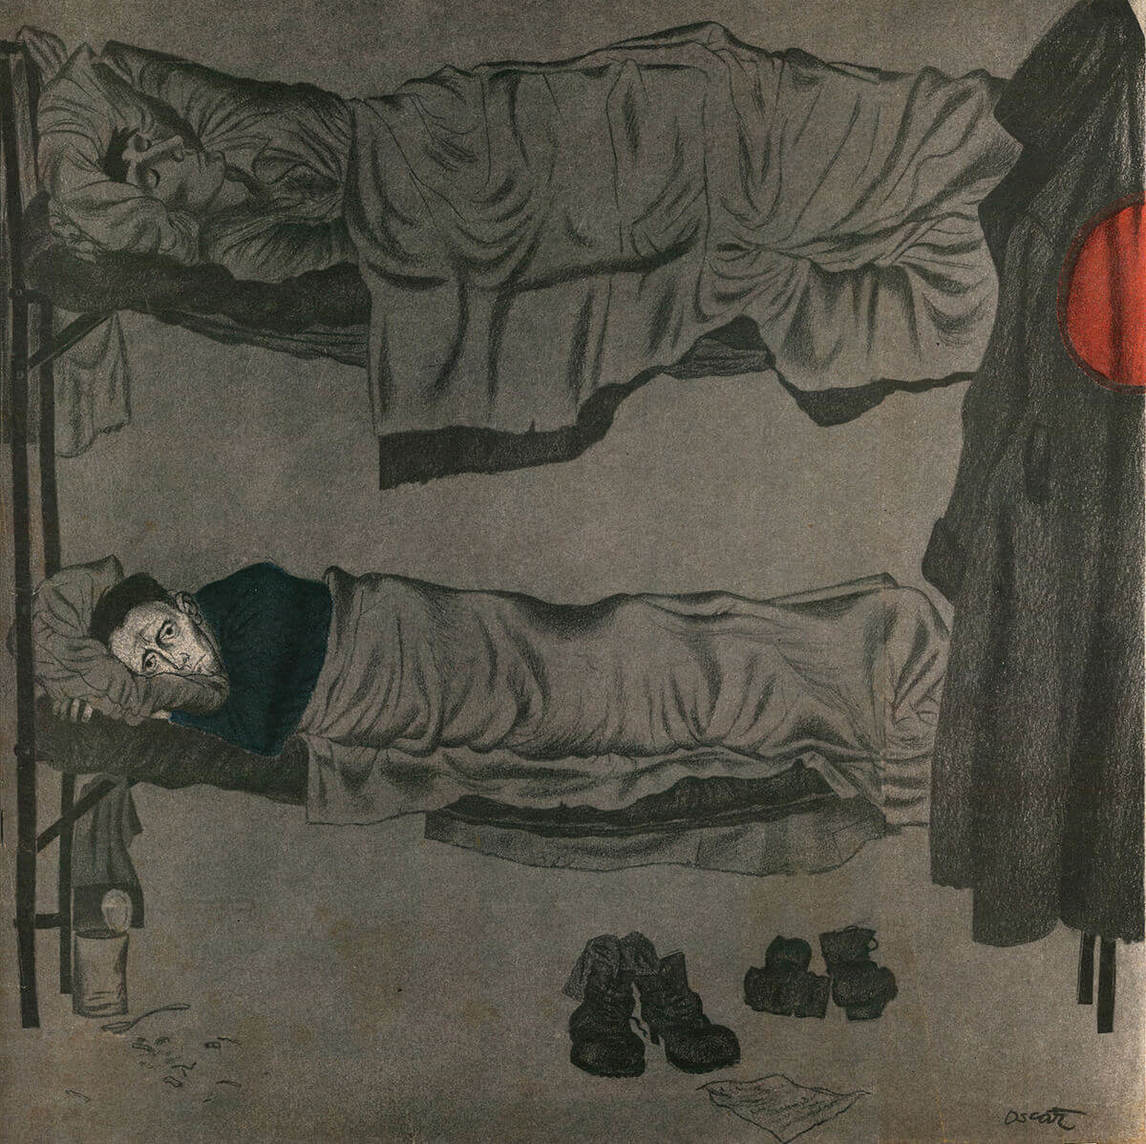 Art Canada Institute, Photograph, Illustration for short story, “Mail,” by John Norman Harris by Oscar Cahén, Maclean’s, tearsheet, 1950